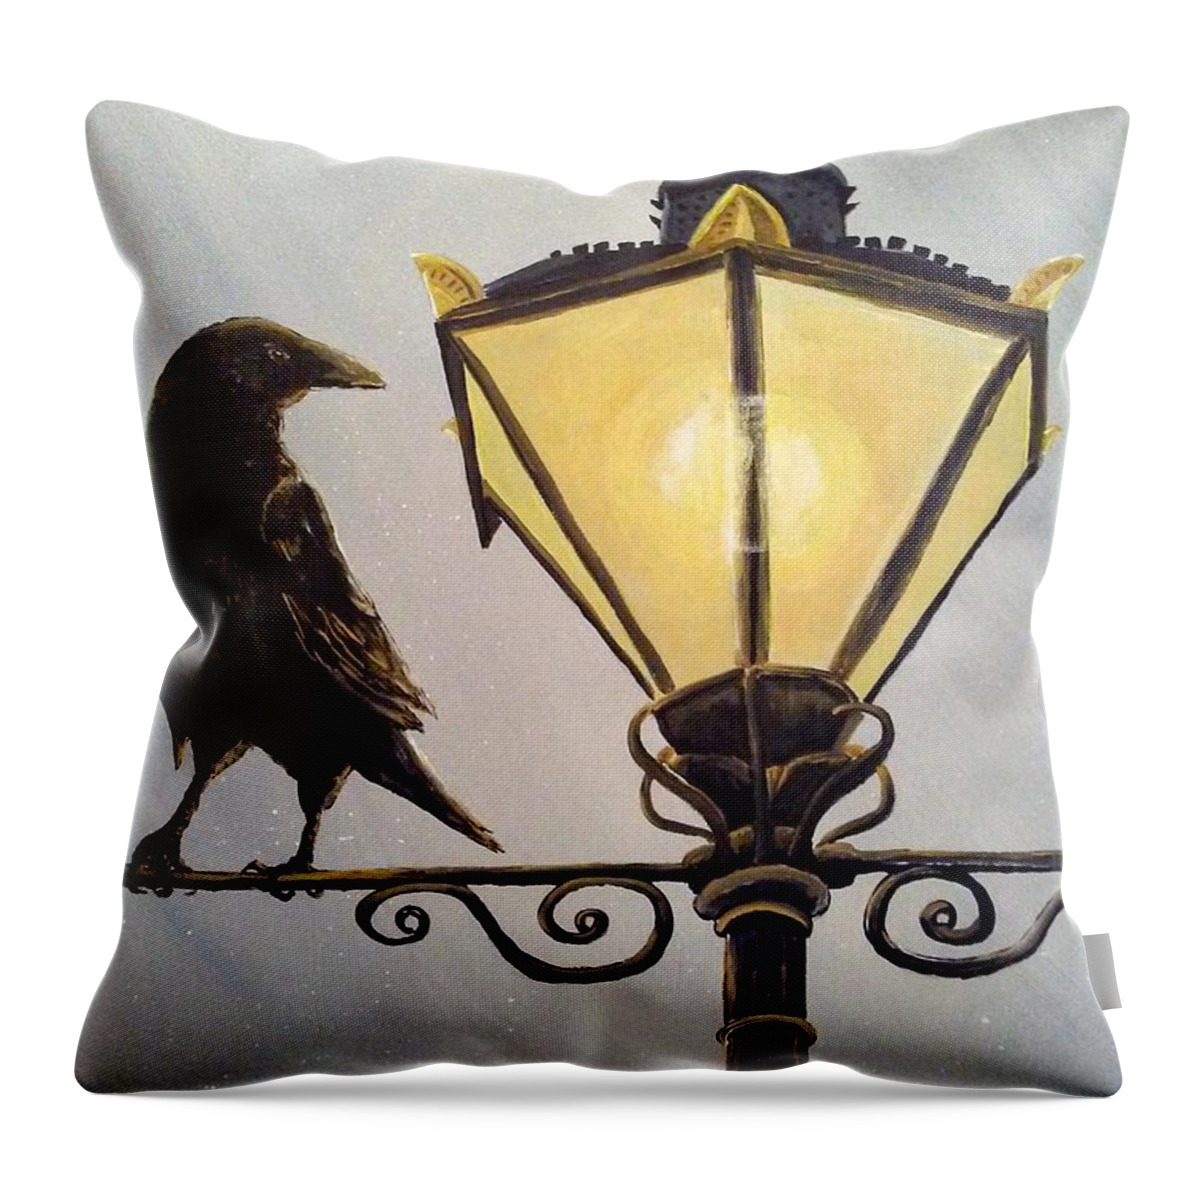 Raven Throw Pillow featuring the painting Raven on Tower of London Lamp by Mindy Gibbs